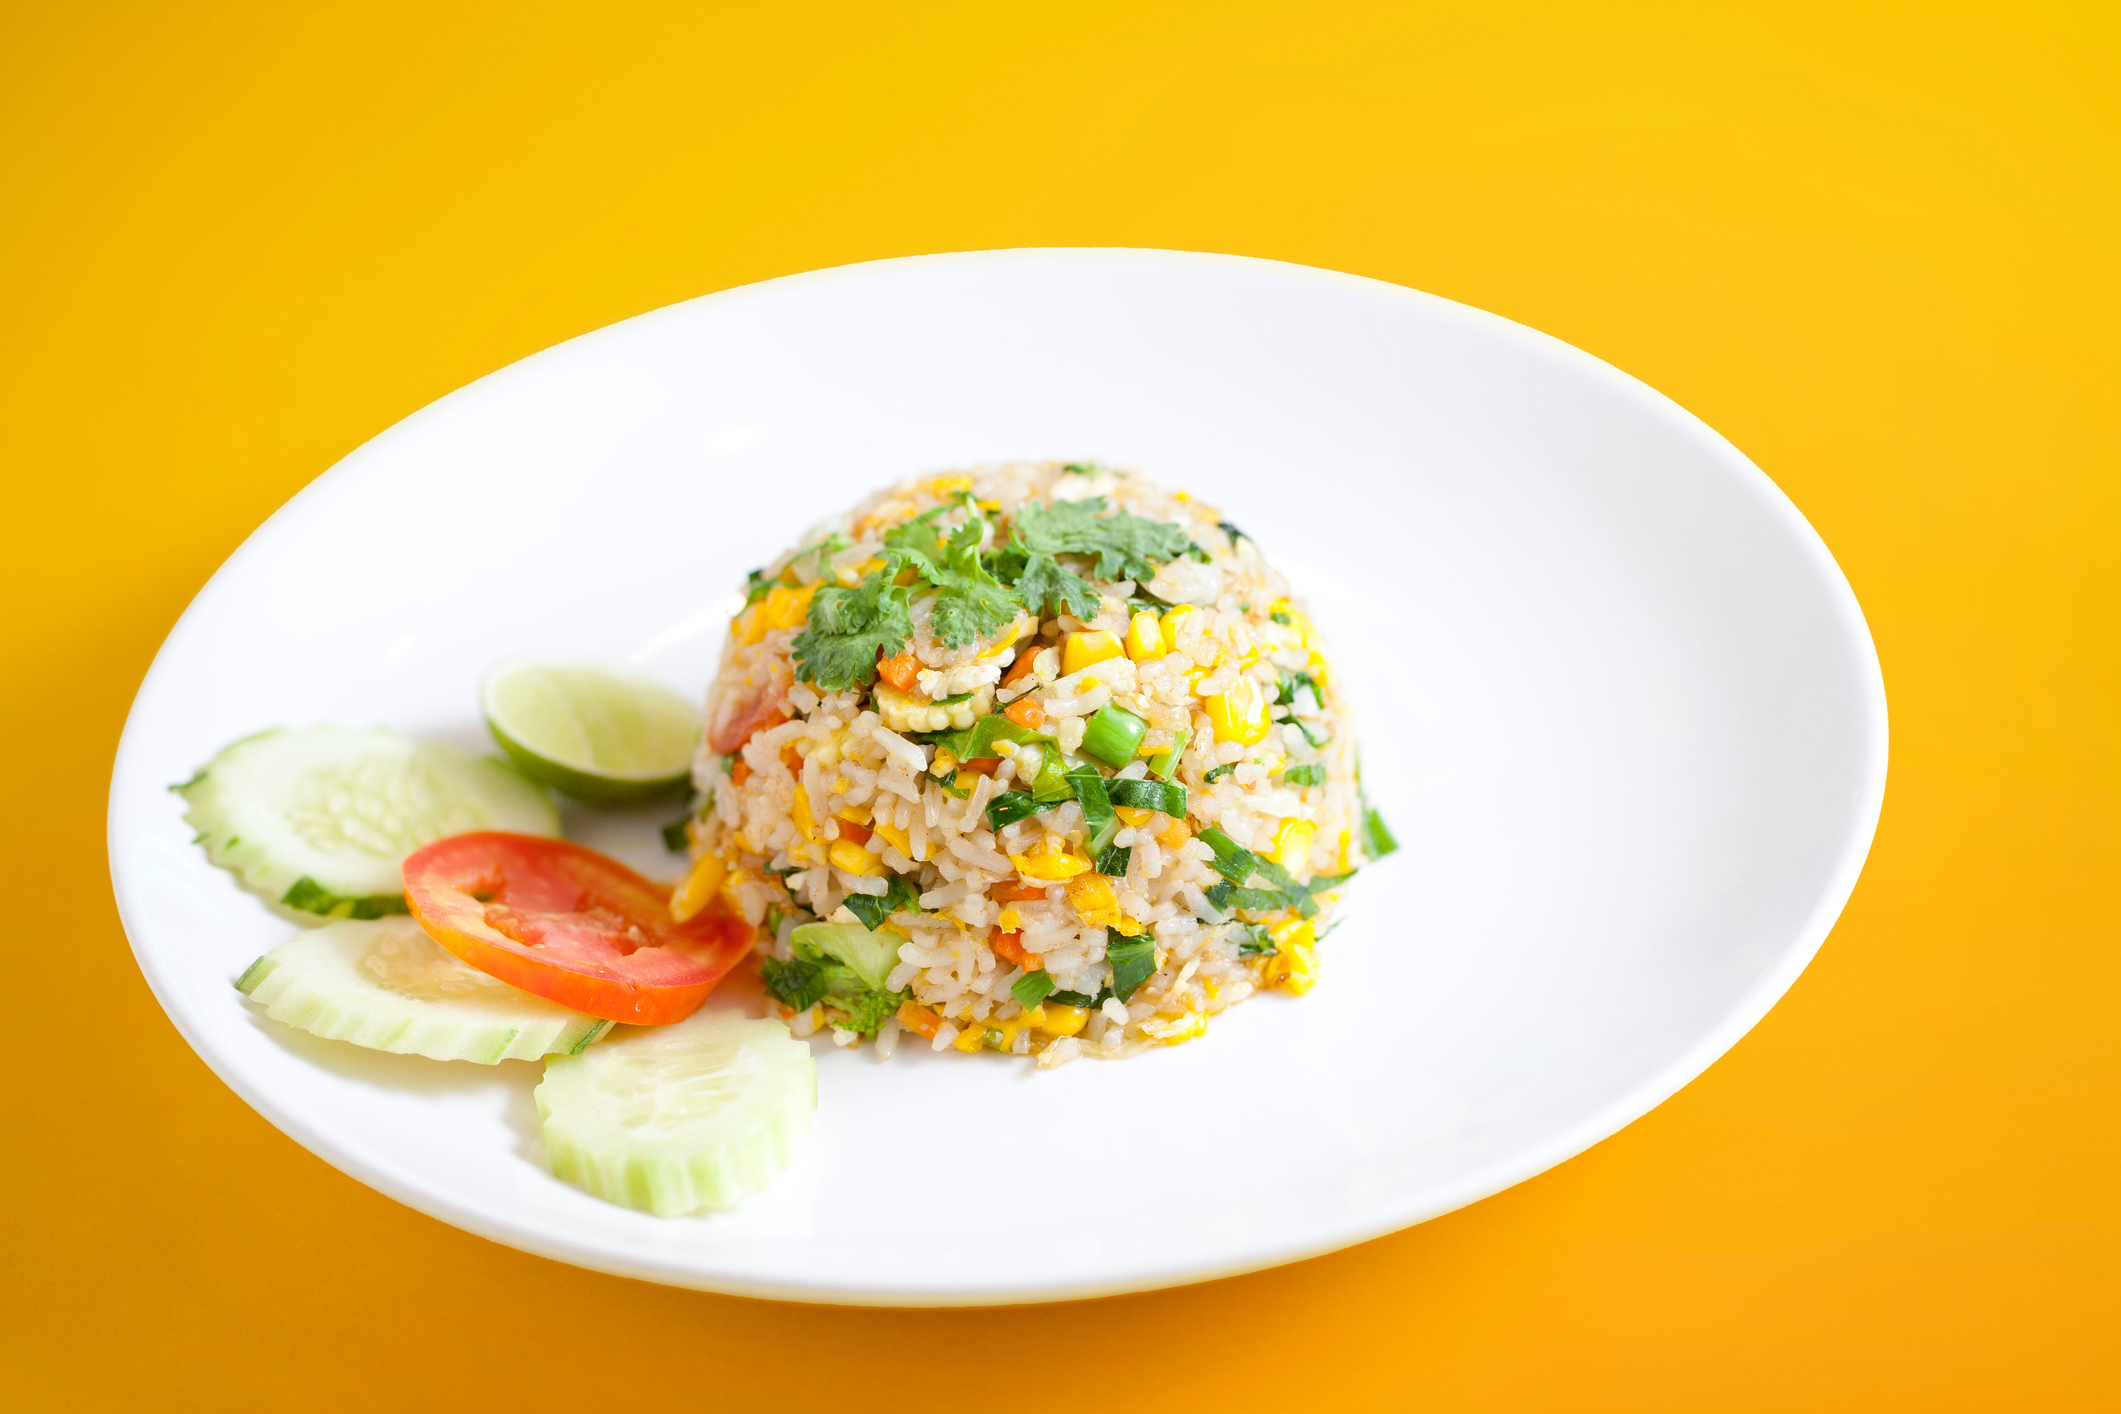 A plate of fried rice with herbs, lime wedges, and slices of cucumber and tomato on a yellow background